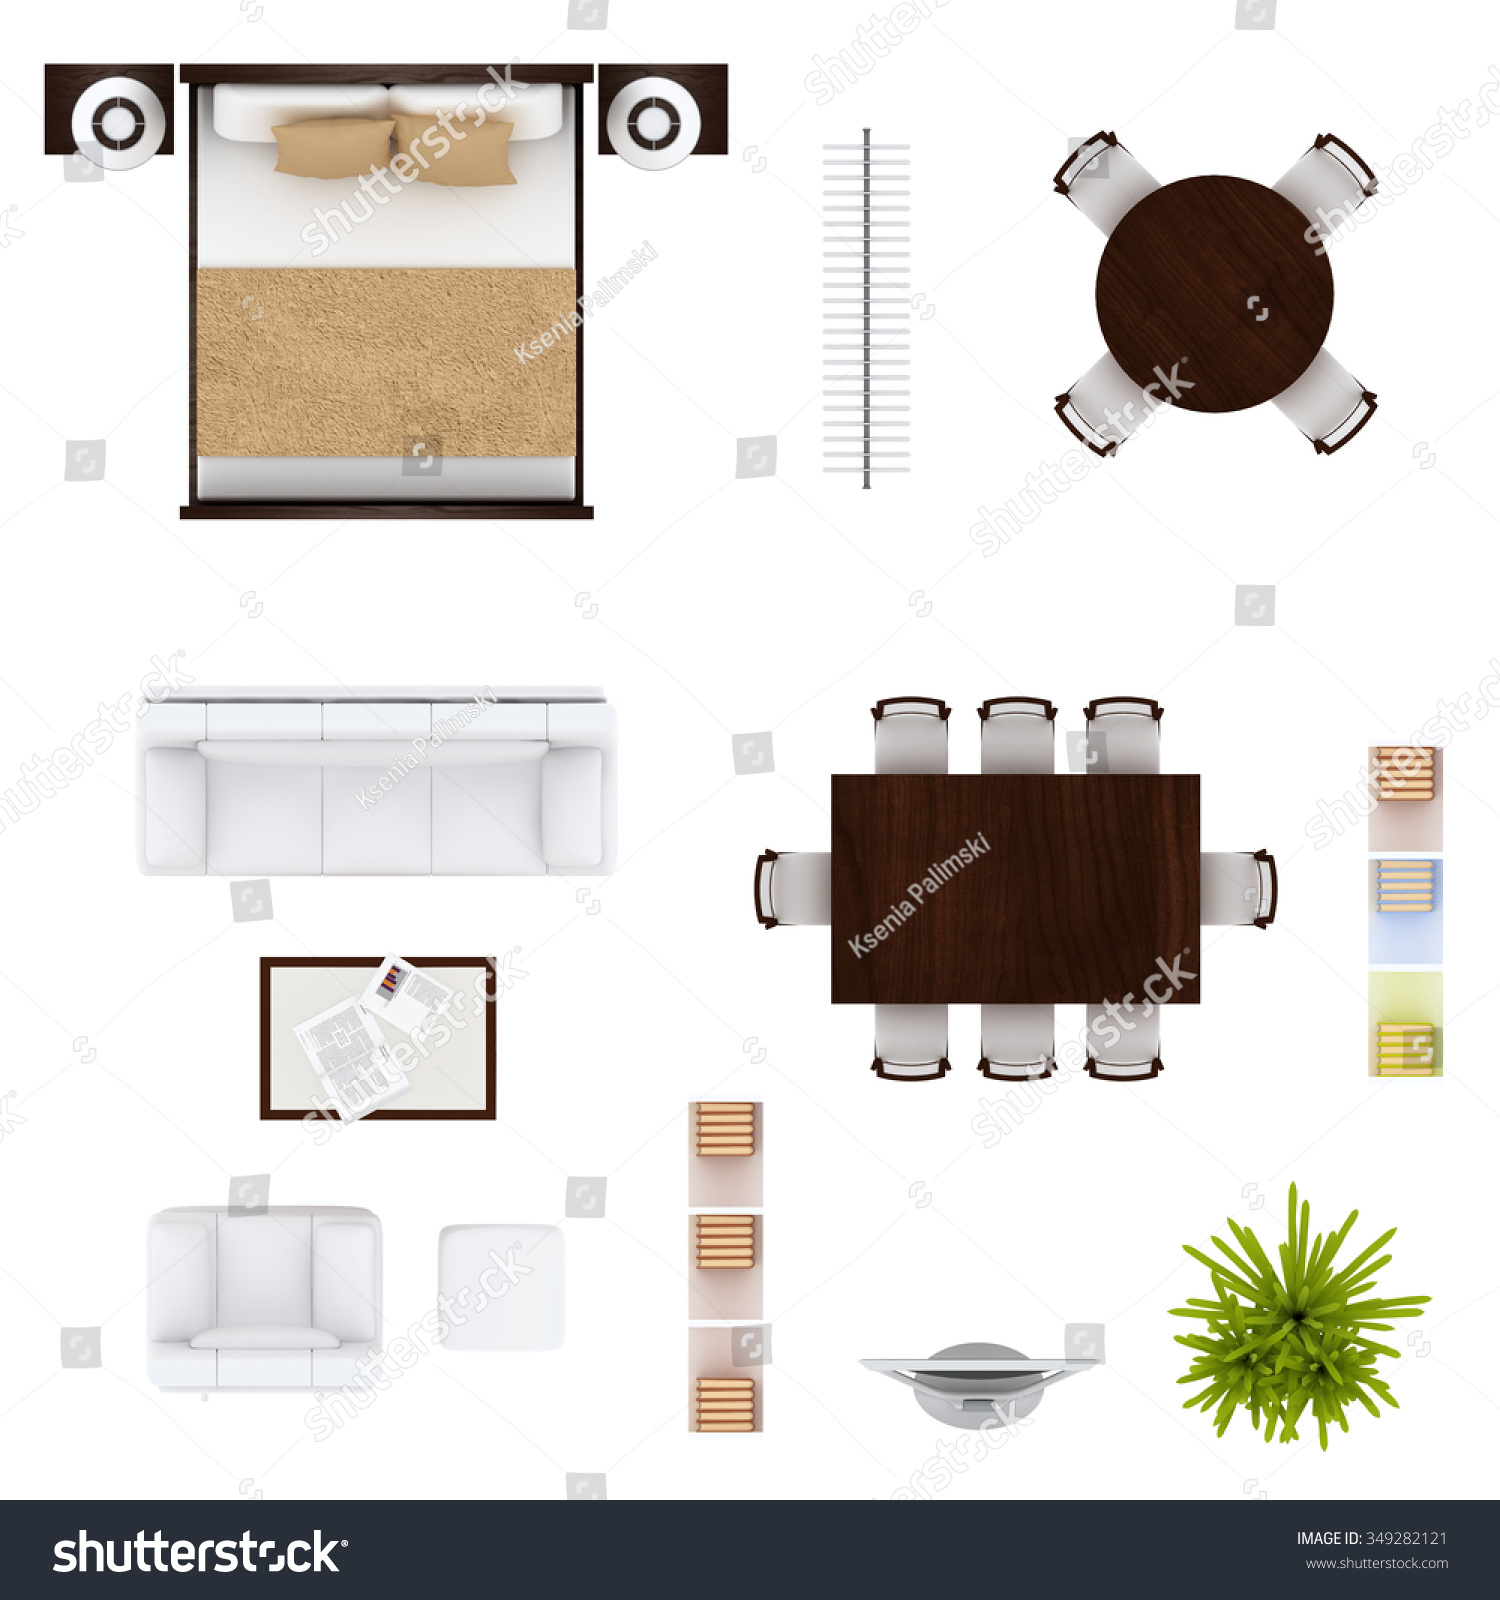 furniture clipart top view - photo #15